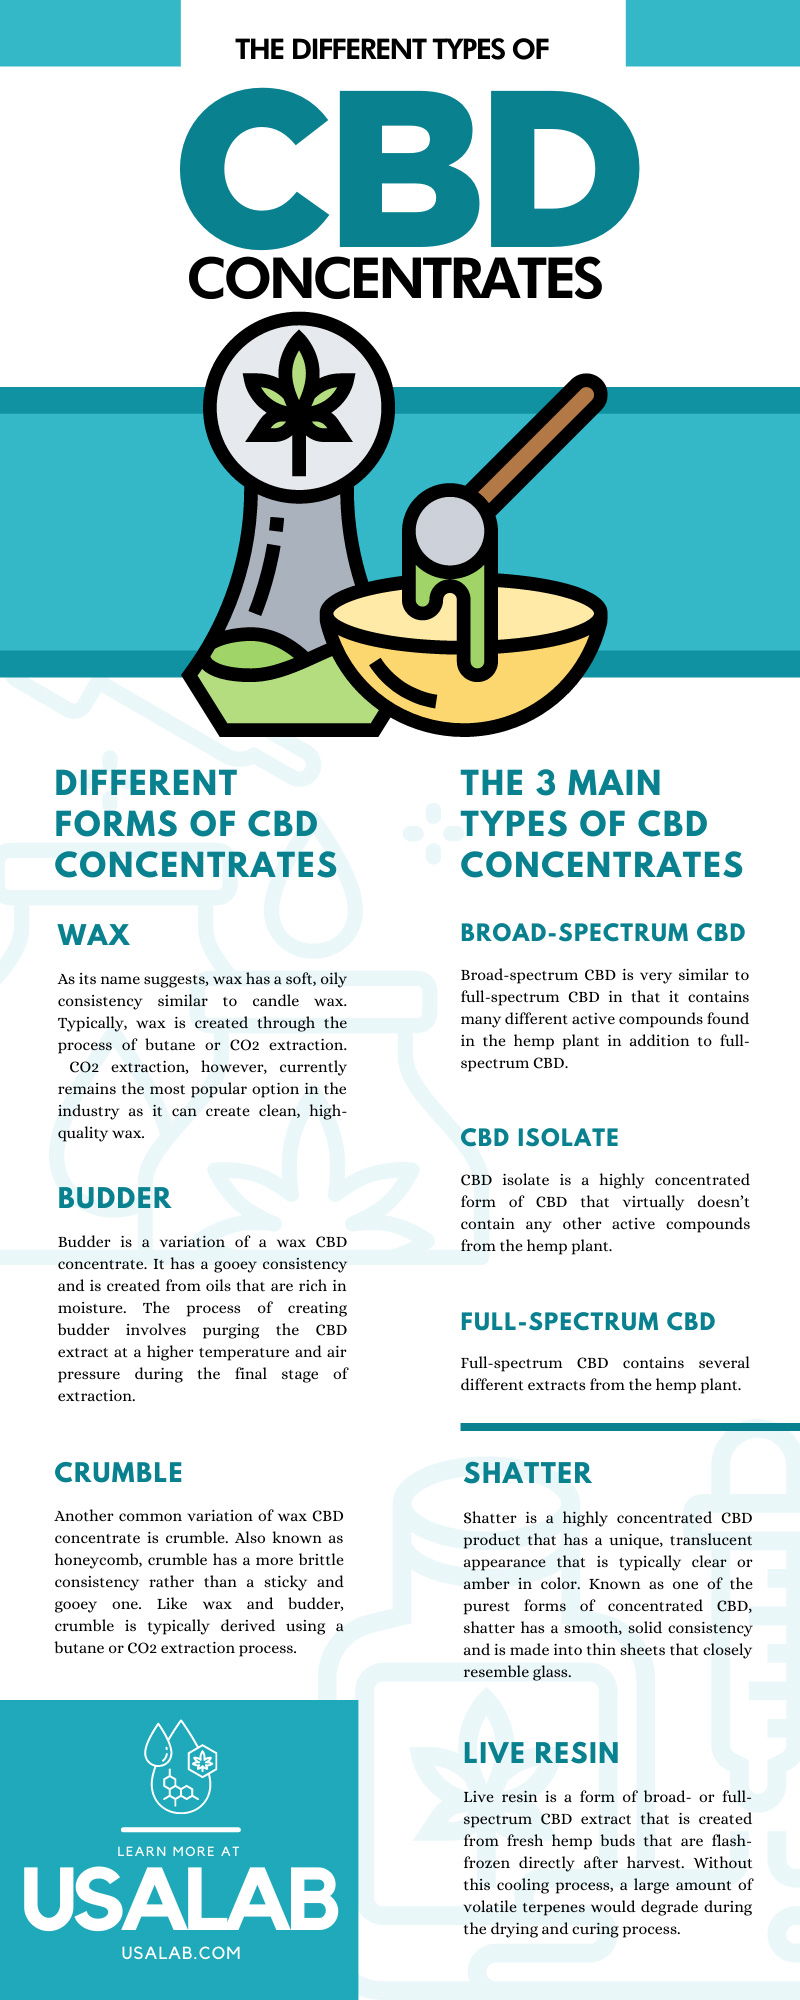 The Different Types of CBD Concentrates